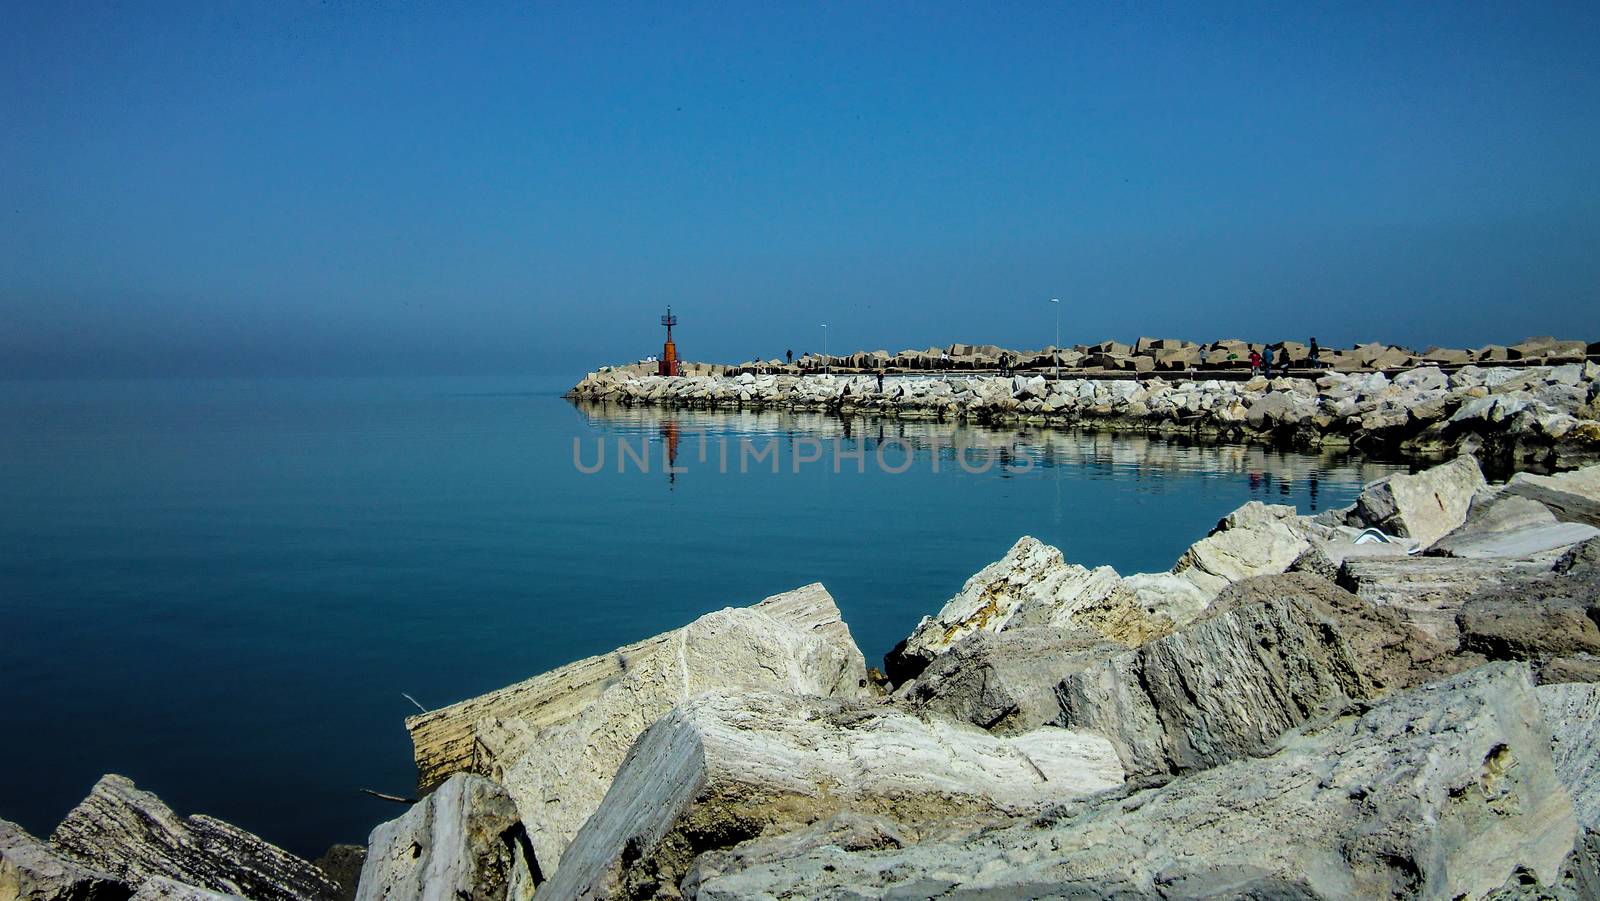 Heavenly view of the pier of the port of Giulianova in Abruzzo Italy. A mystical landscape in which the orrizzontre line between sky and sea merge into a unique spectacle.